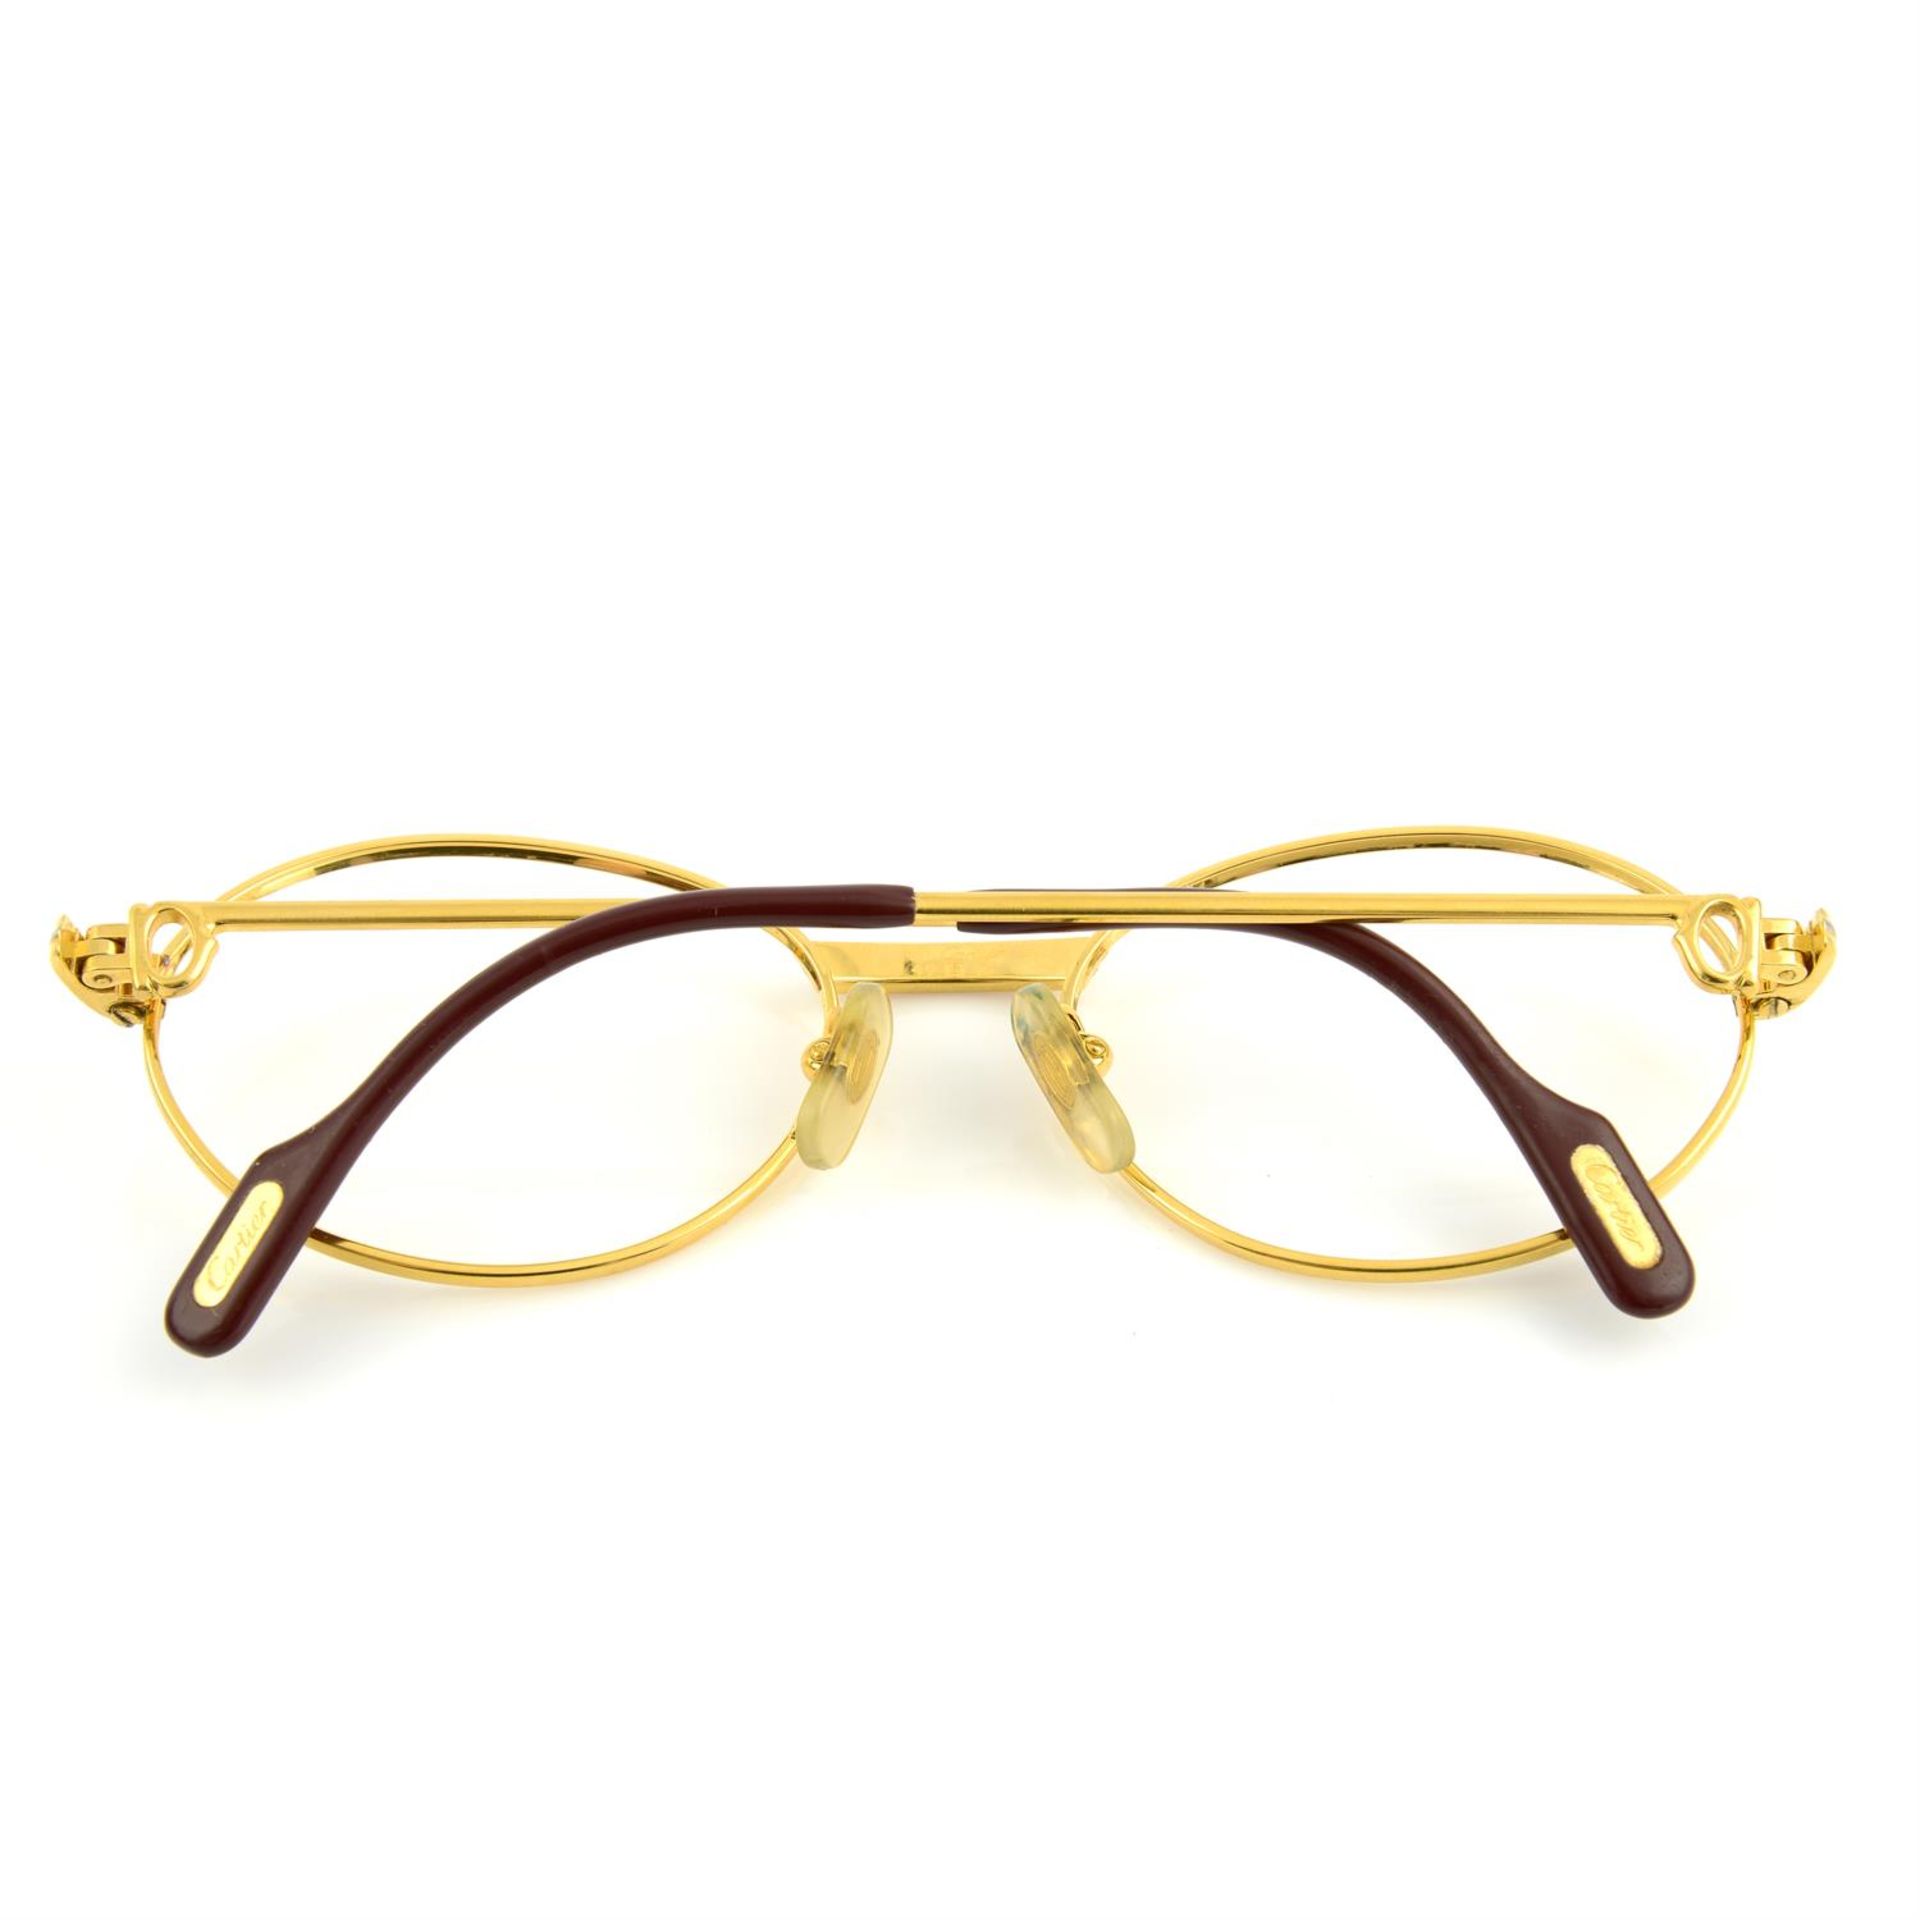 CARTIER - a pair of Tank glasses frames. - Image 2 of 3